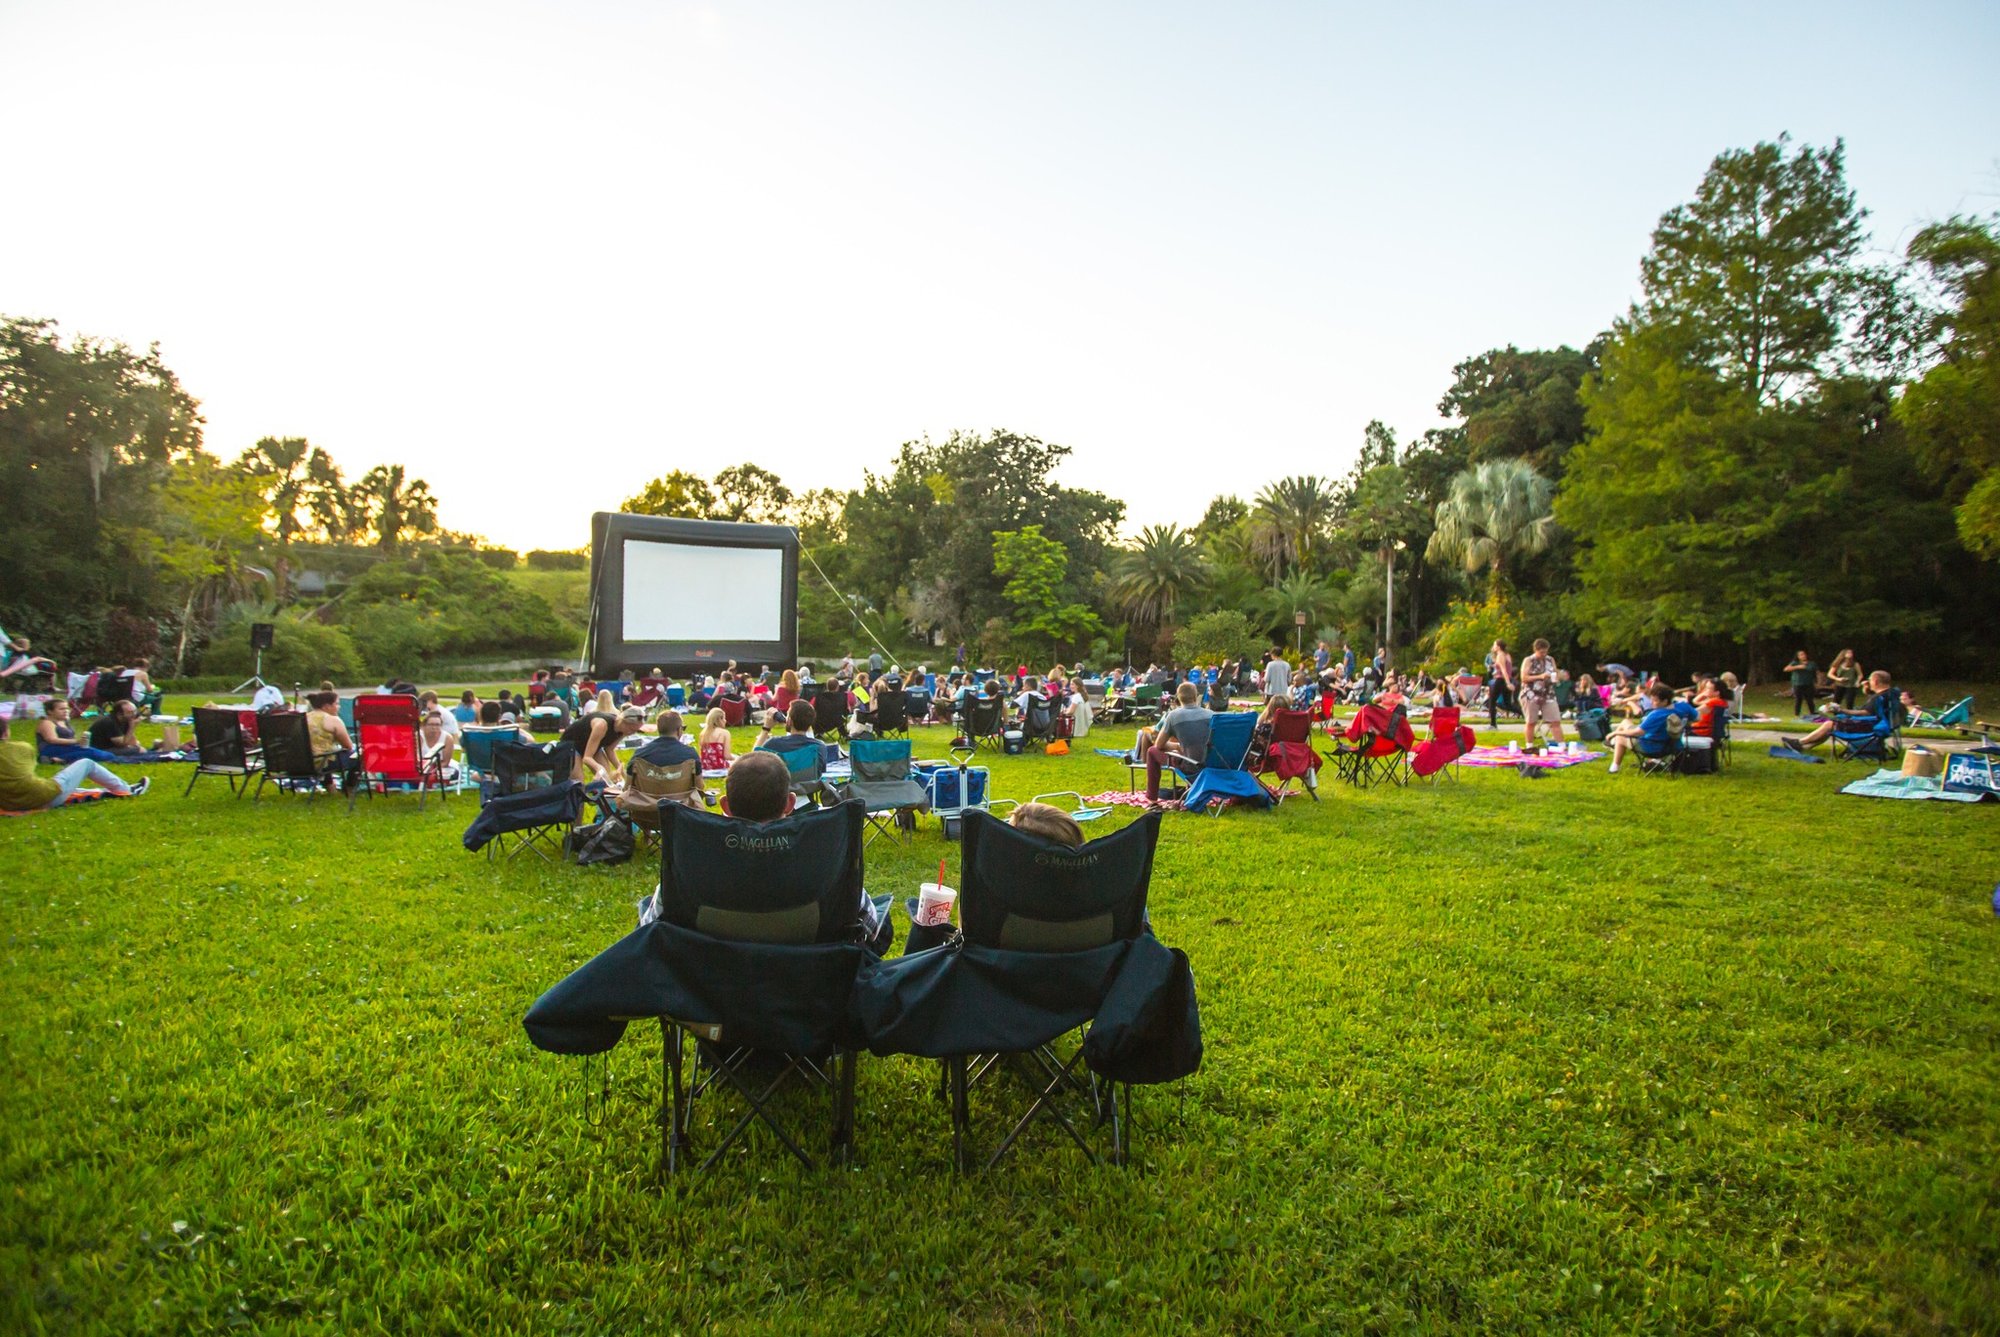 chairs and blankets on a lawn outdoors with movie screen